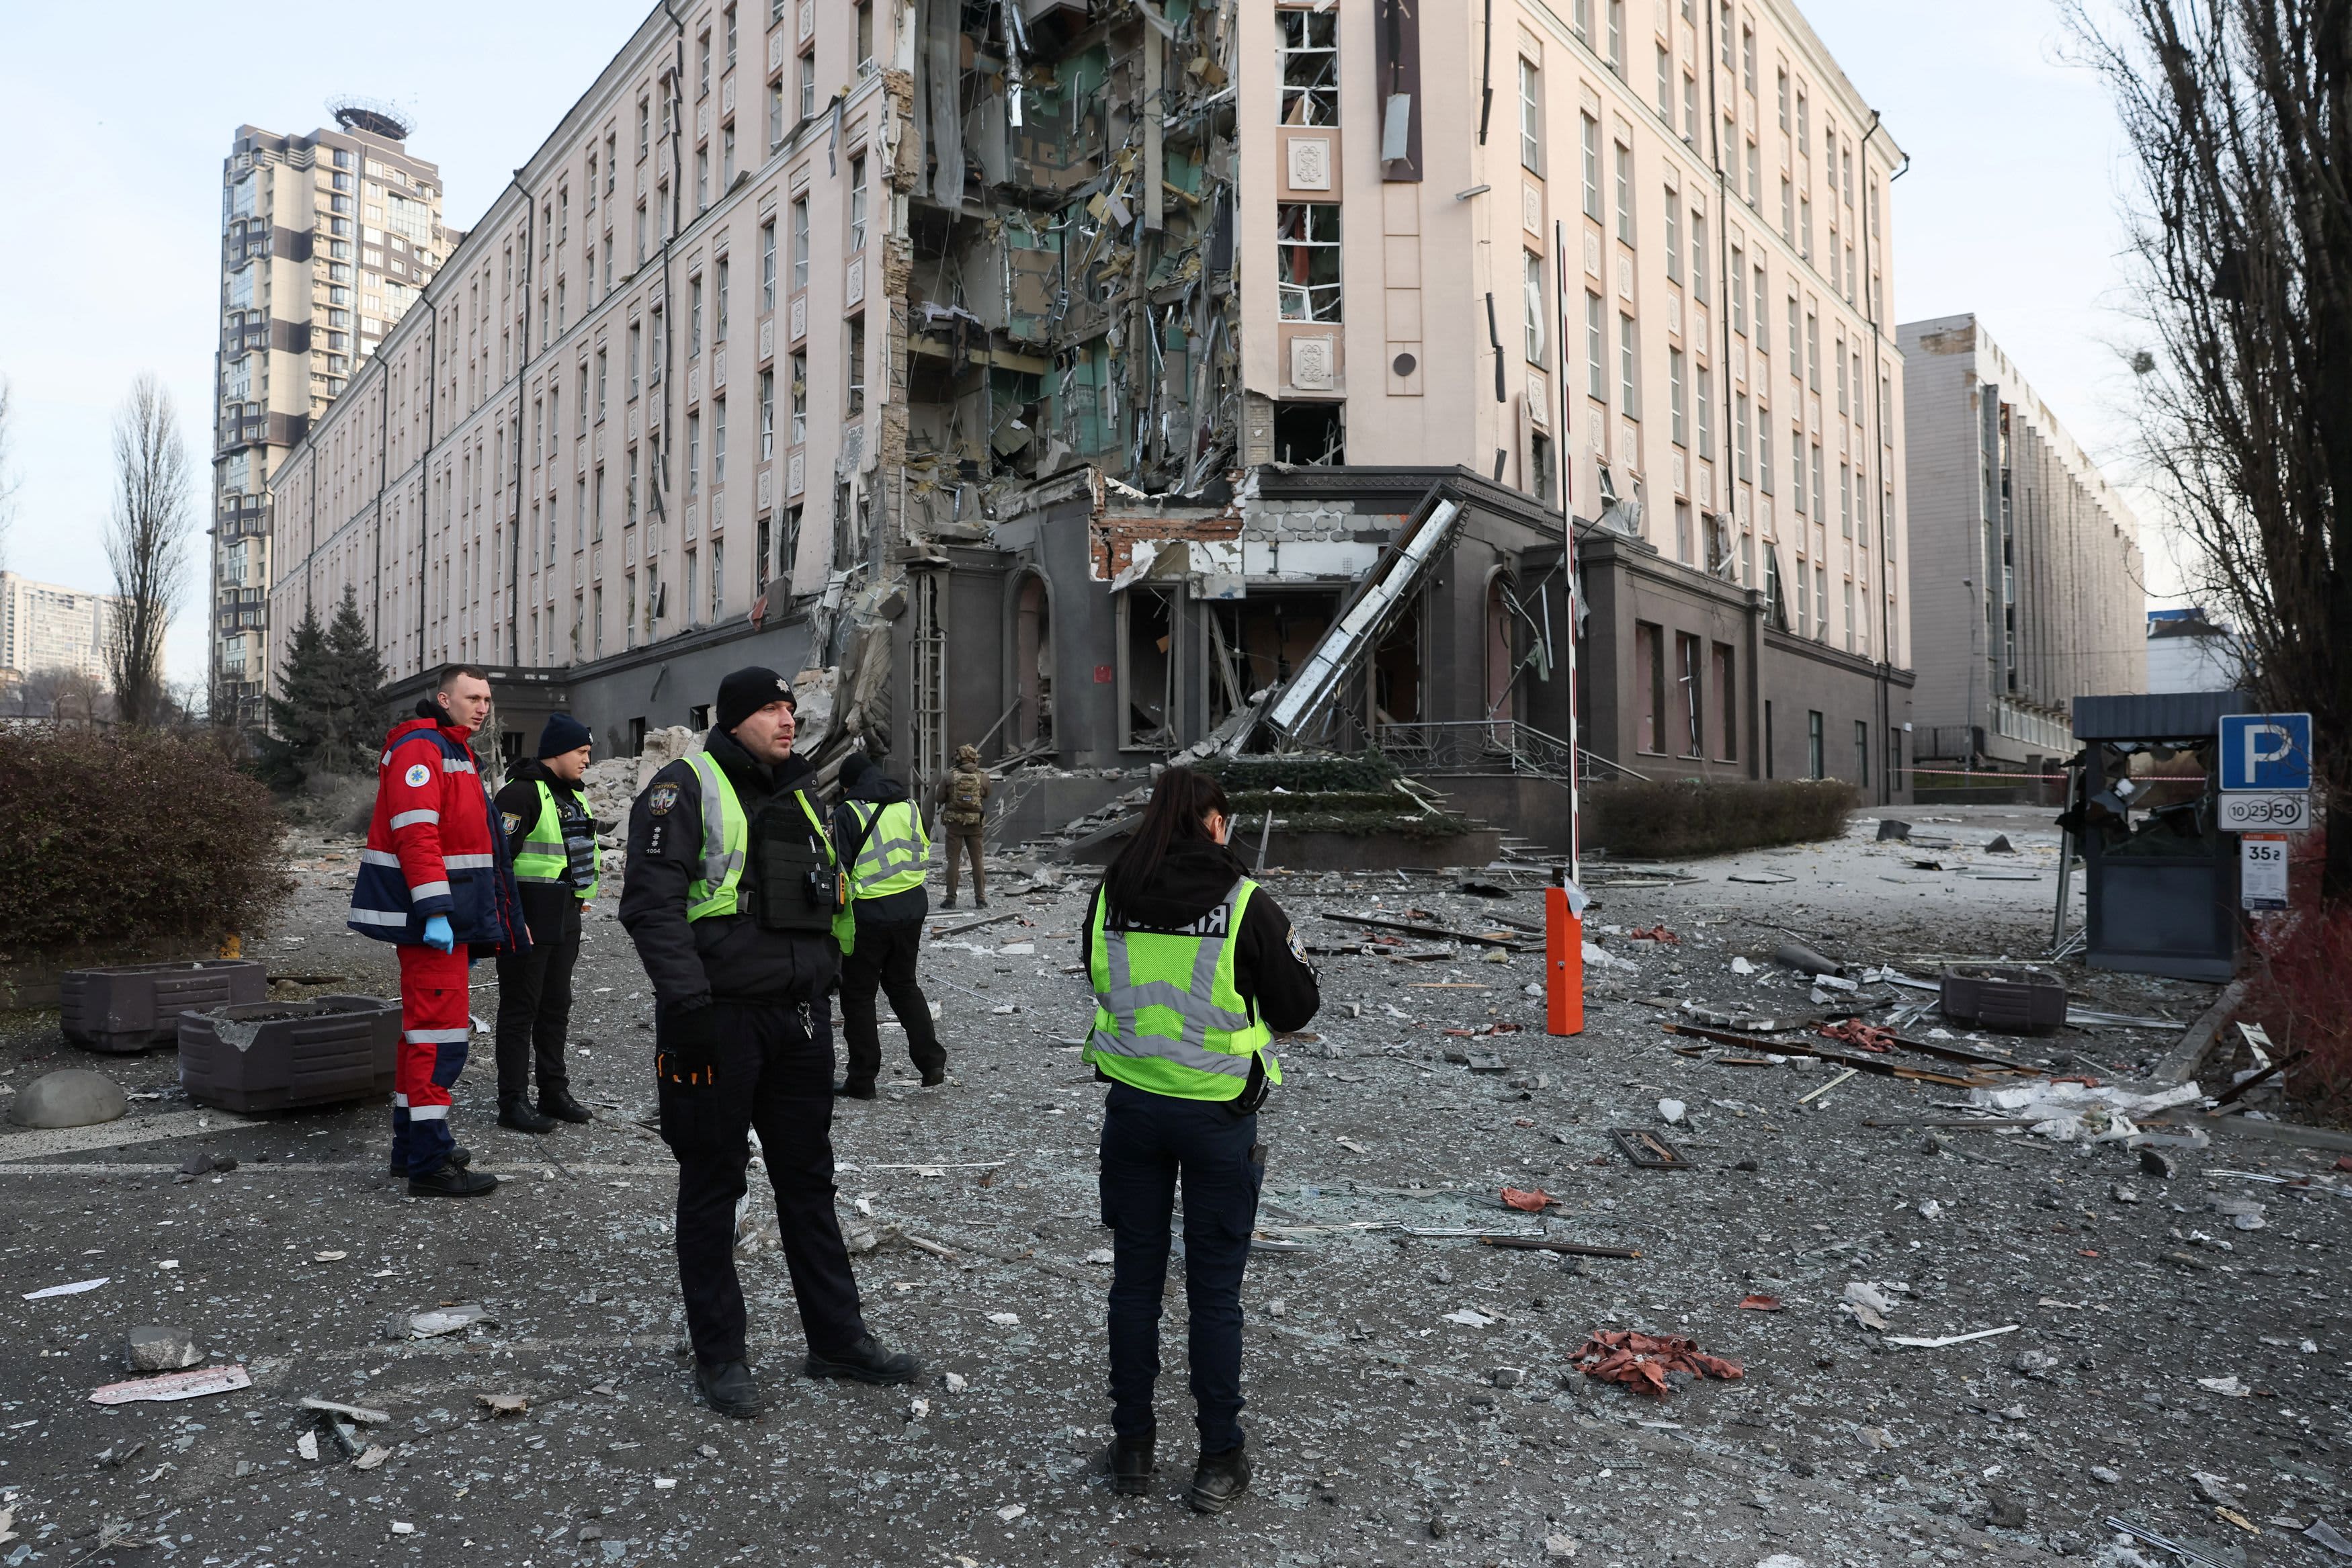 Rescuers work at a site of a building damaged during a Russian missile strike, amid Russias attack on Ukraine, in Kyiv, Ukraine December 31, 2022. REUTERS/Gleb Garanich